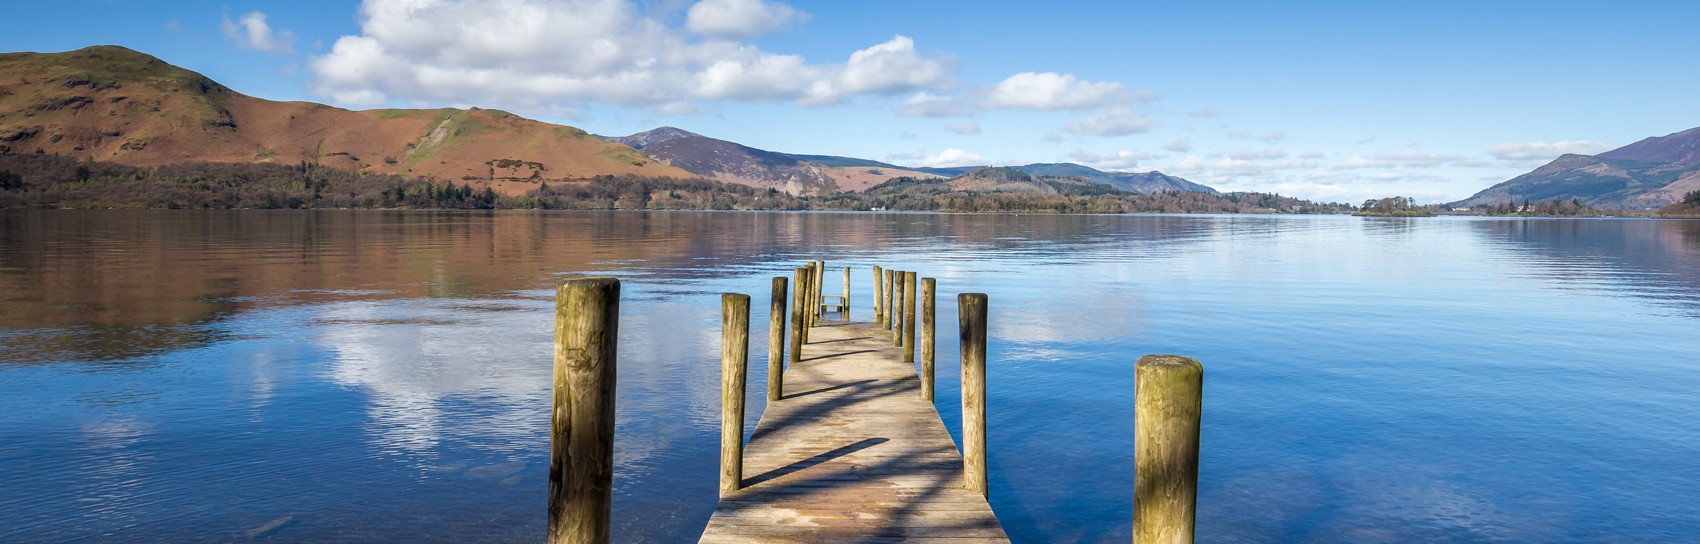 Derwent Water in The Lake District. Photograph by DAVE ZDANOWICZ